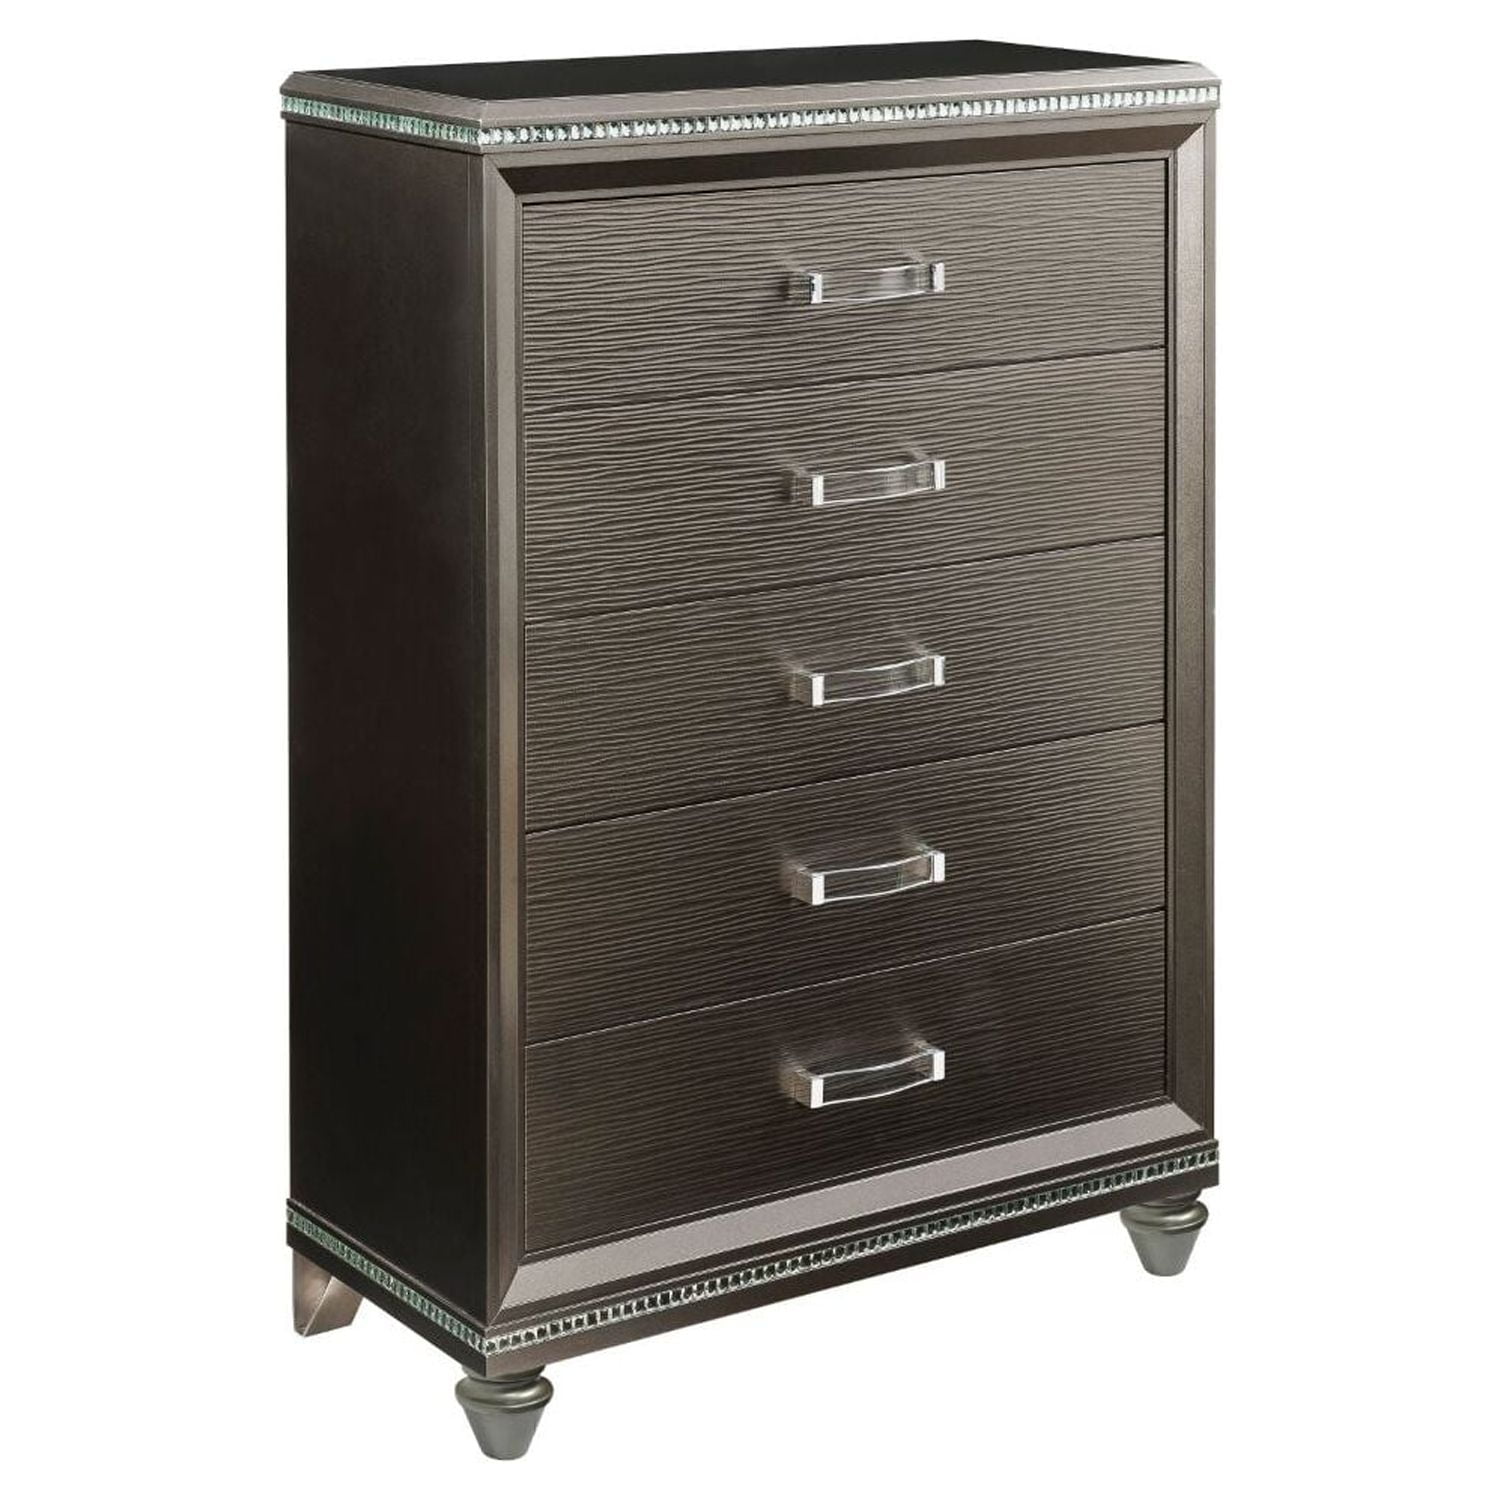 Picture of Acme Furniture 27946 38 x 18 x 54 in. Sadie Chest, Dark Champagne